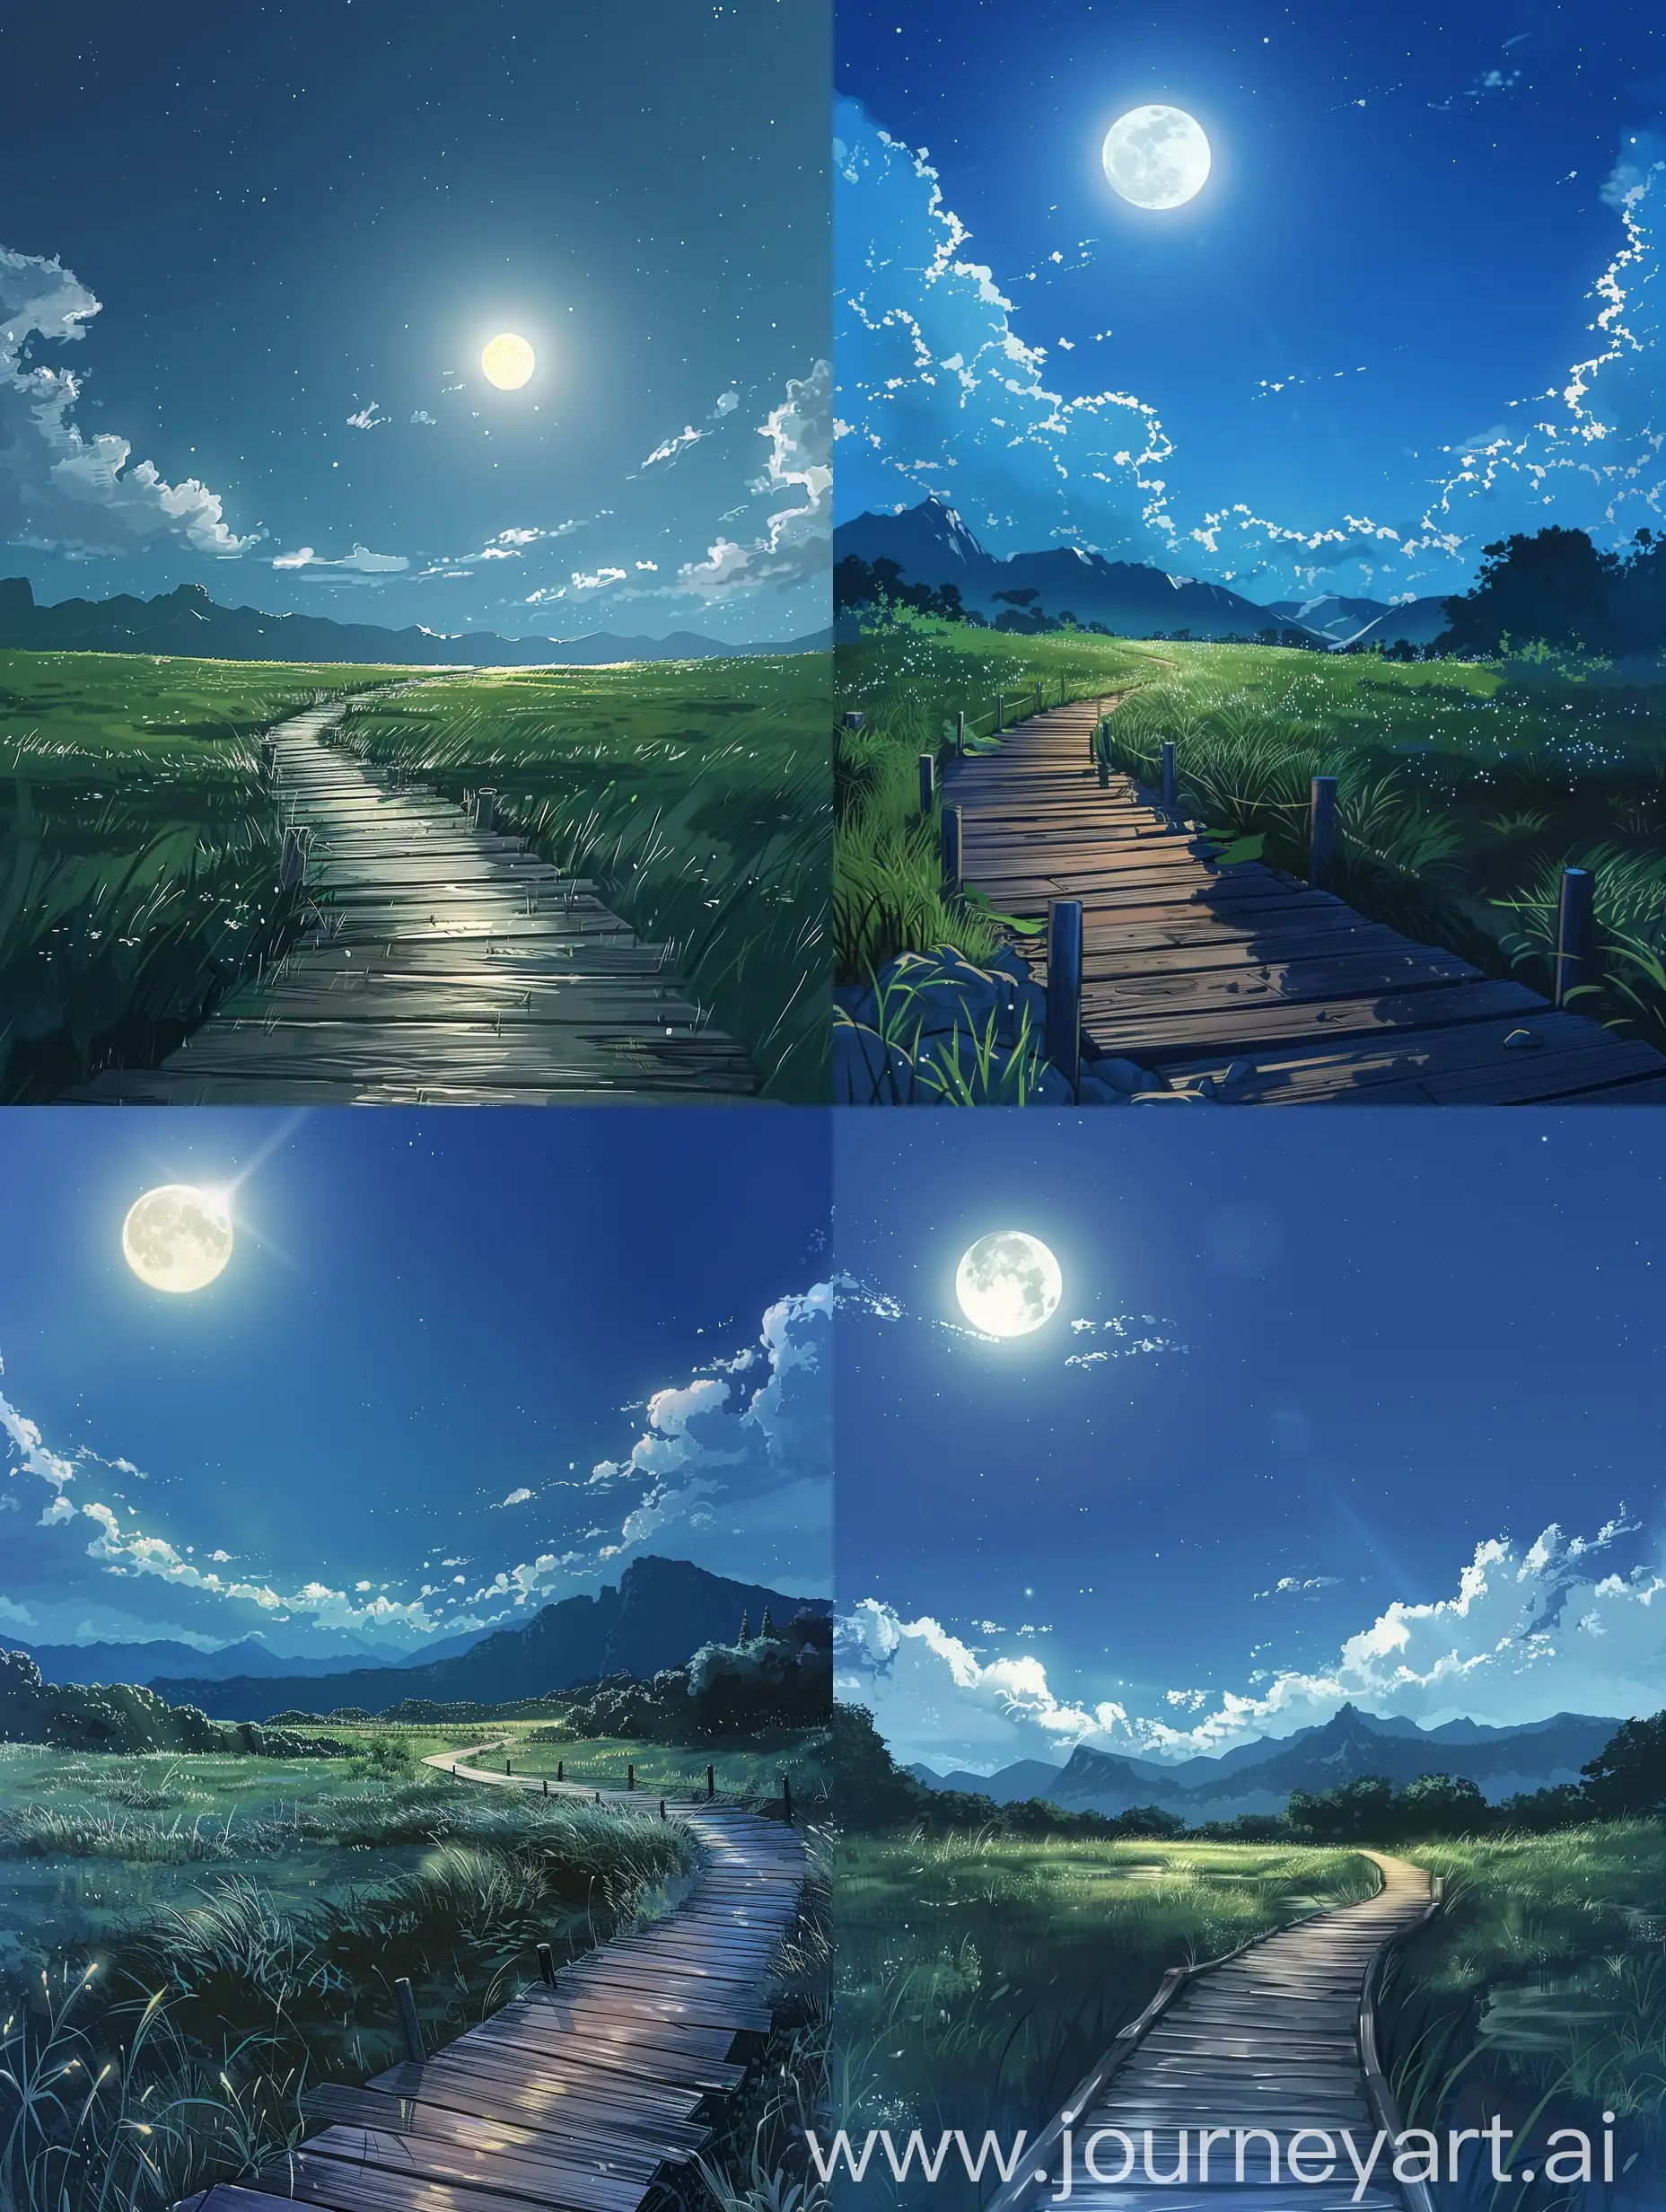 Anime style a peaceful night scene in a natural setting. A wooden walkway meanders through a grass-covered field, leading towards a range of mountains in the distance. The sky above is clear, showcasing the bright moon and a scattering of clouds, which bathes the landscape in a soft, ethereal light. The overall atmosphere of the image is one of calm and serenity.